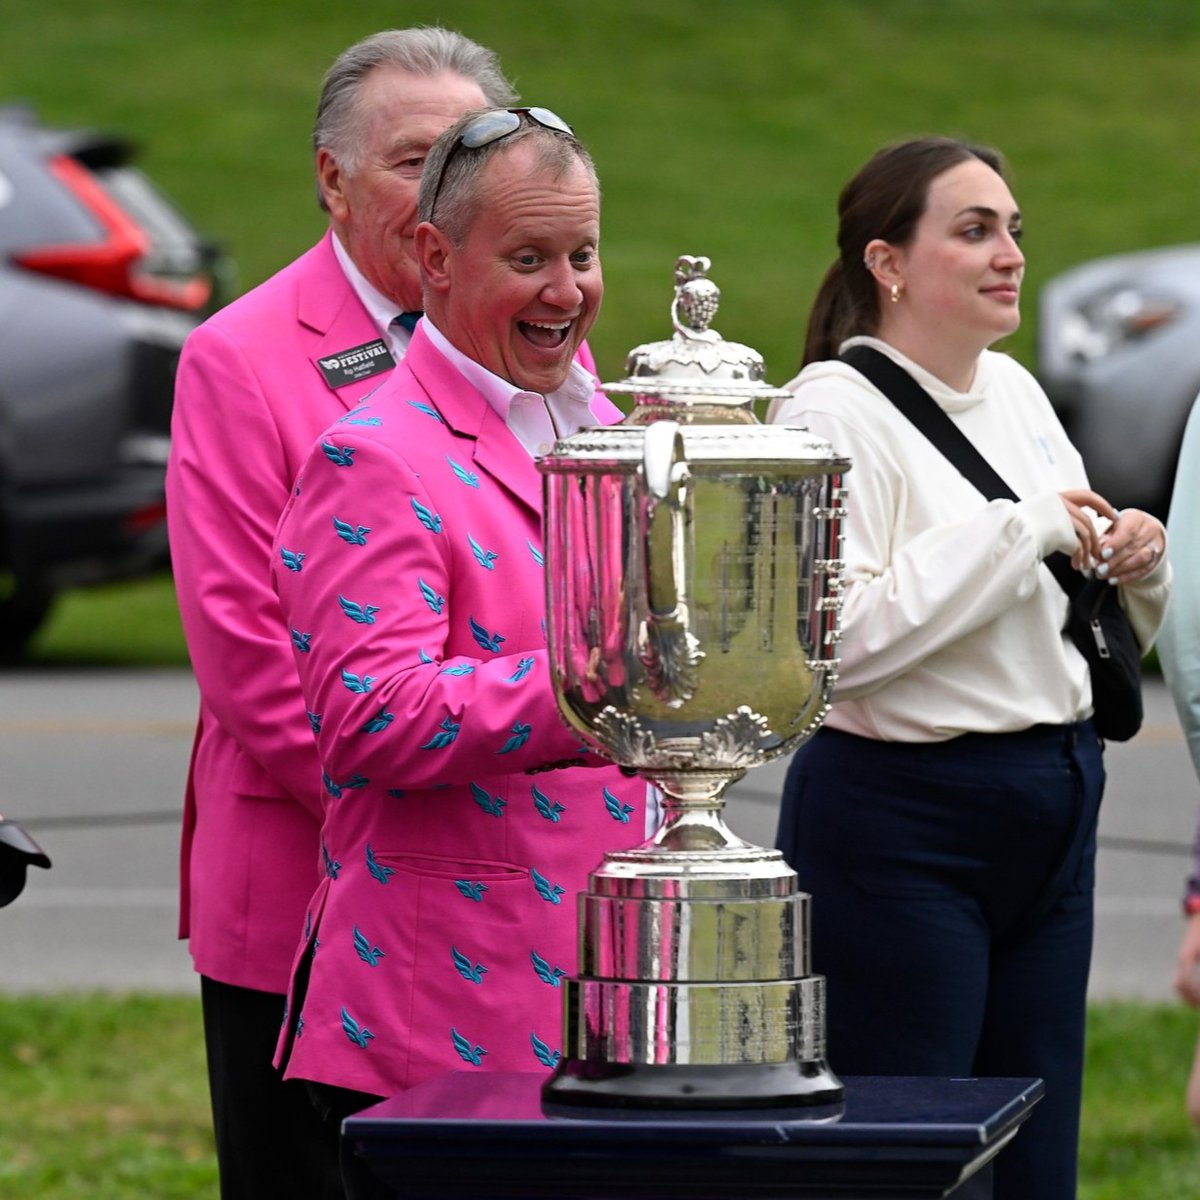 That look you get when you see the Wanamaker Trophy in #Louisville. 😁 From #KYDerbyFestival to the #PGA, spring is #winning! 🎉⛳🏆 Get all the @PGAChampionship details: bit.ly/3fuhCi7